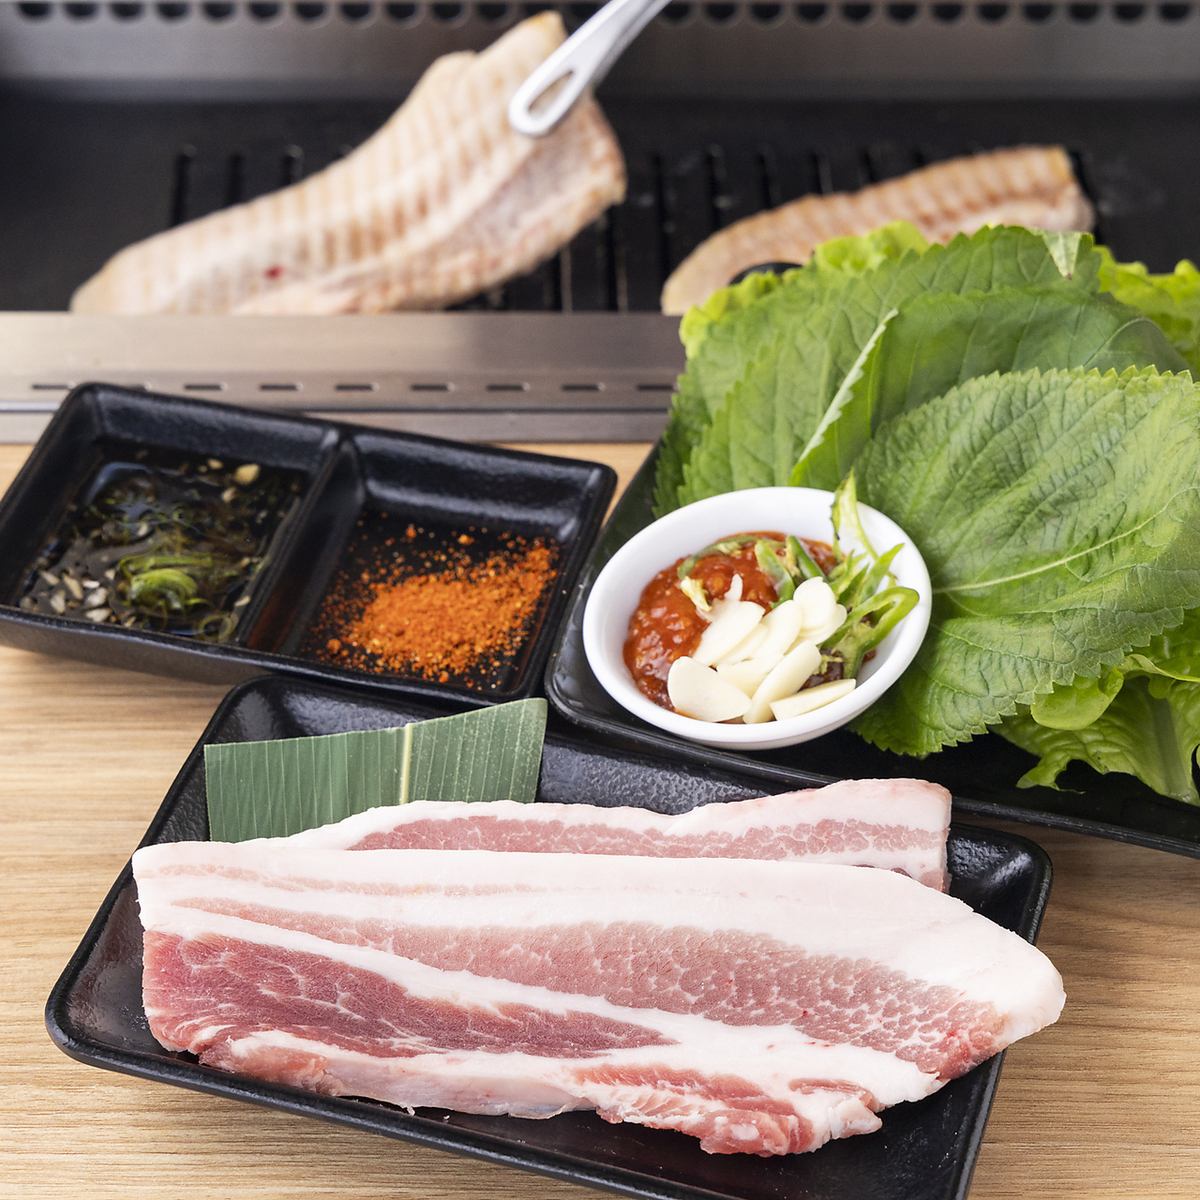 Enjoy our carefully selected meats with chadol bagi and samgyeopsal!